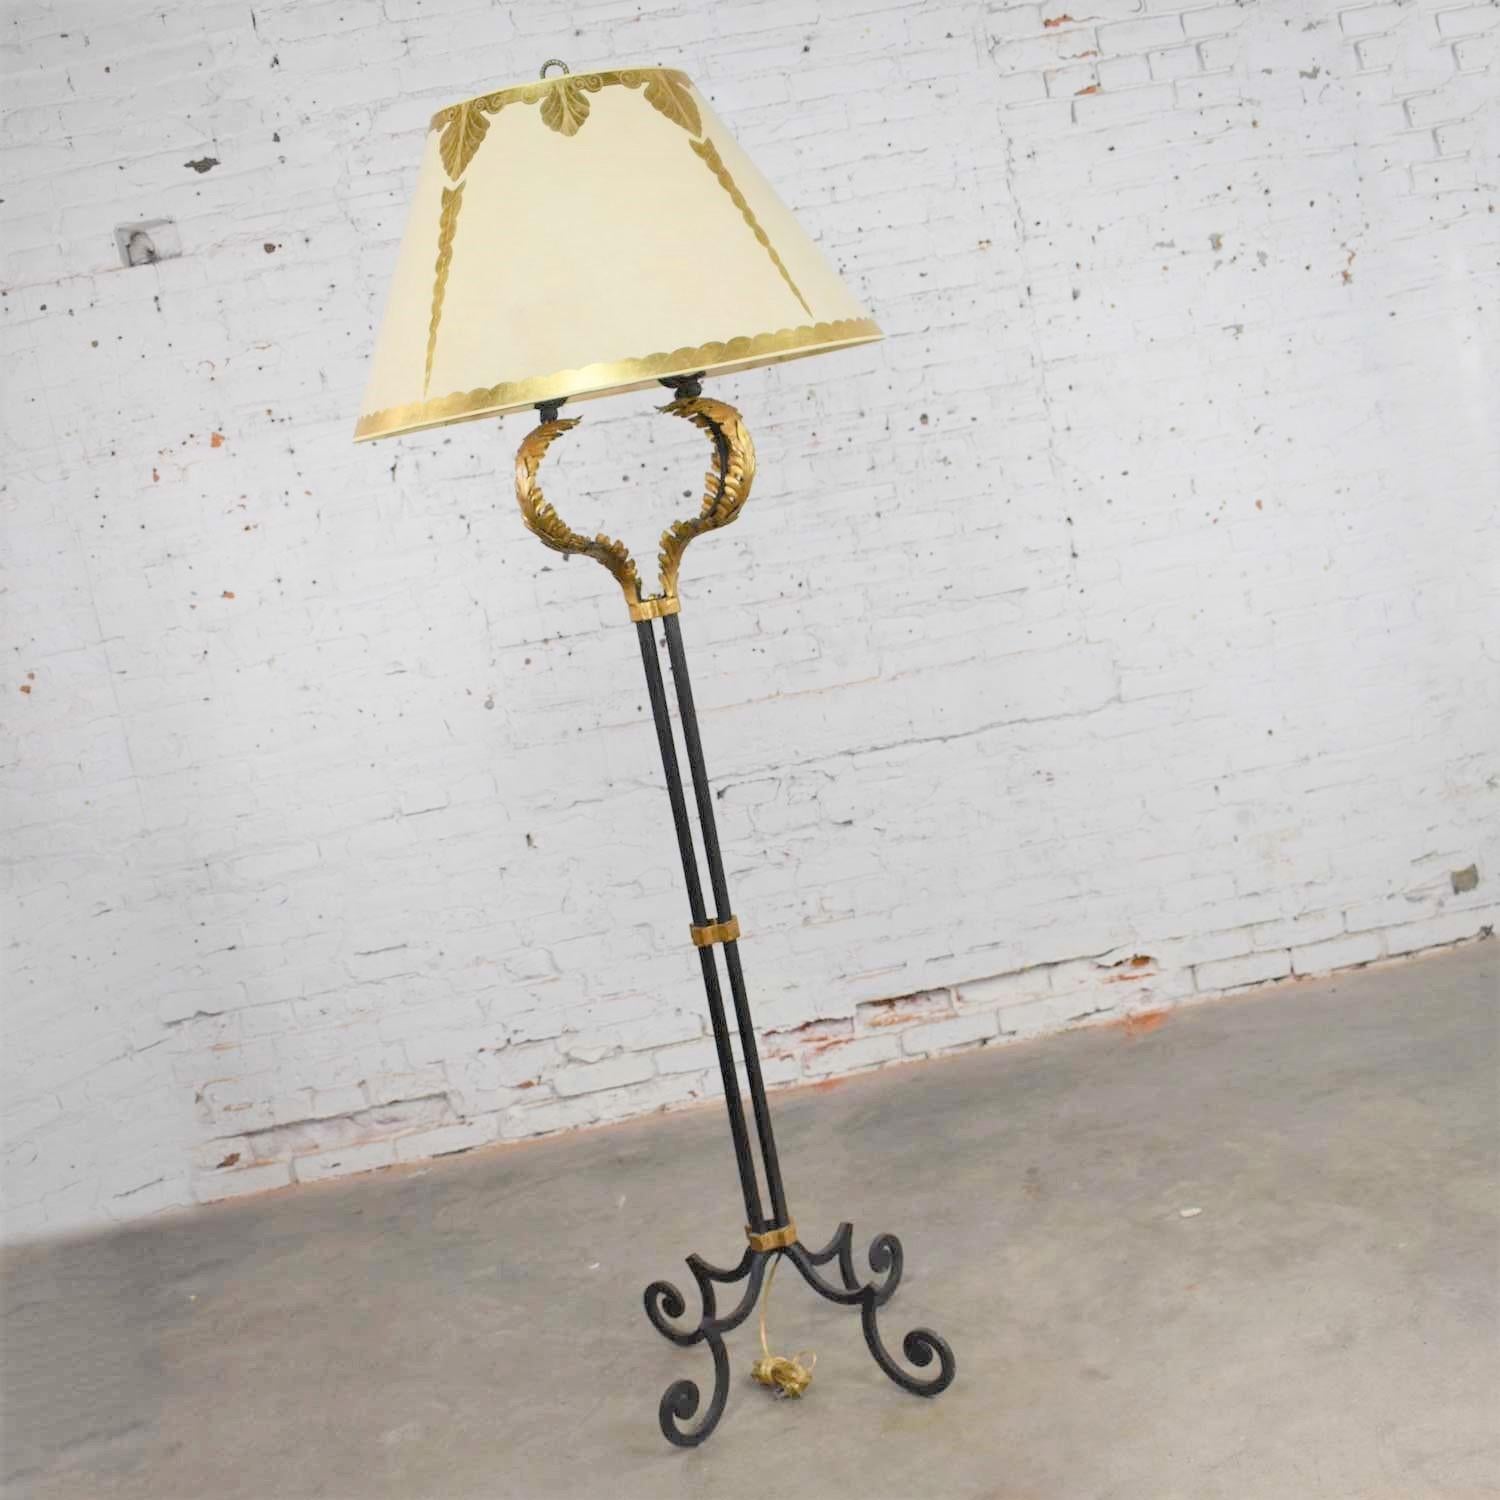 Monumental Neoclassical Iron Floor Lamp Acanthus Leaf Design & Parchment Shade For Sale 1